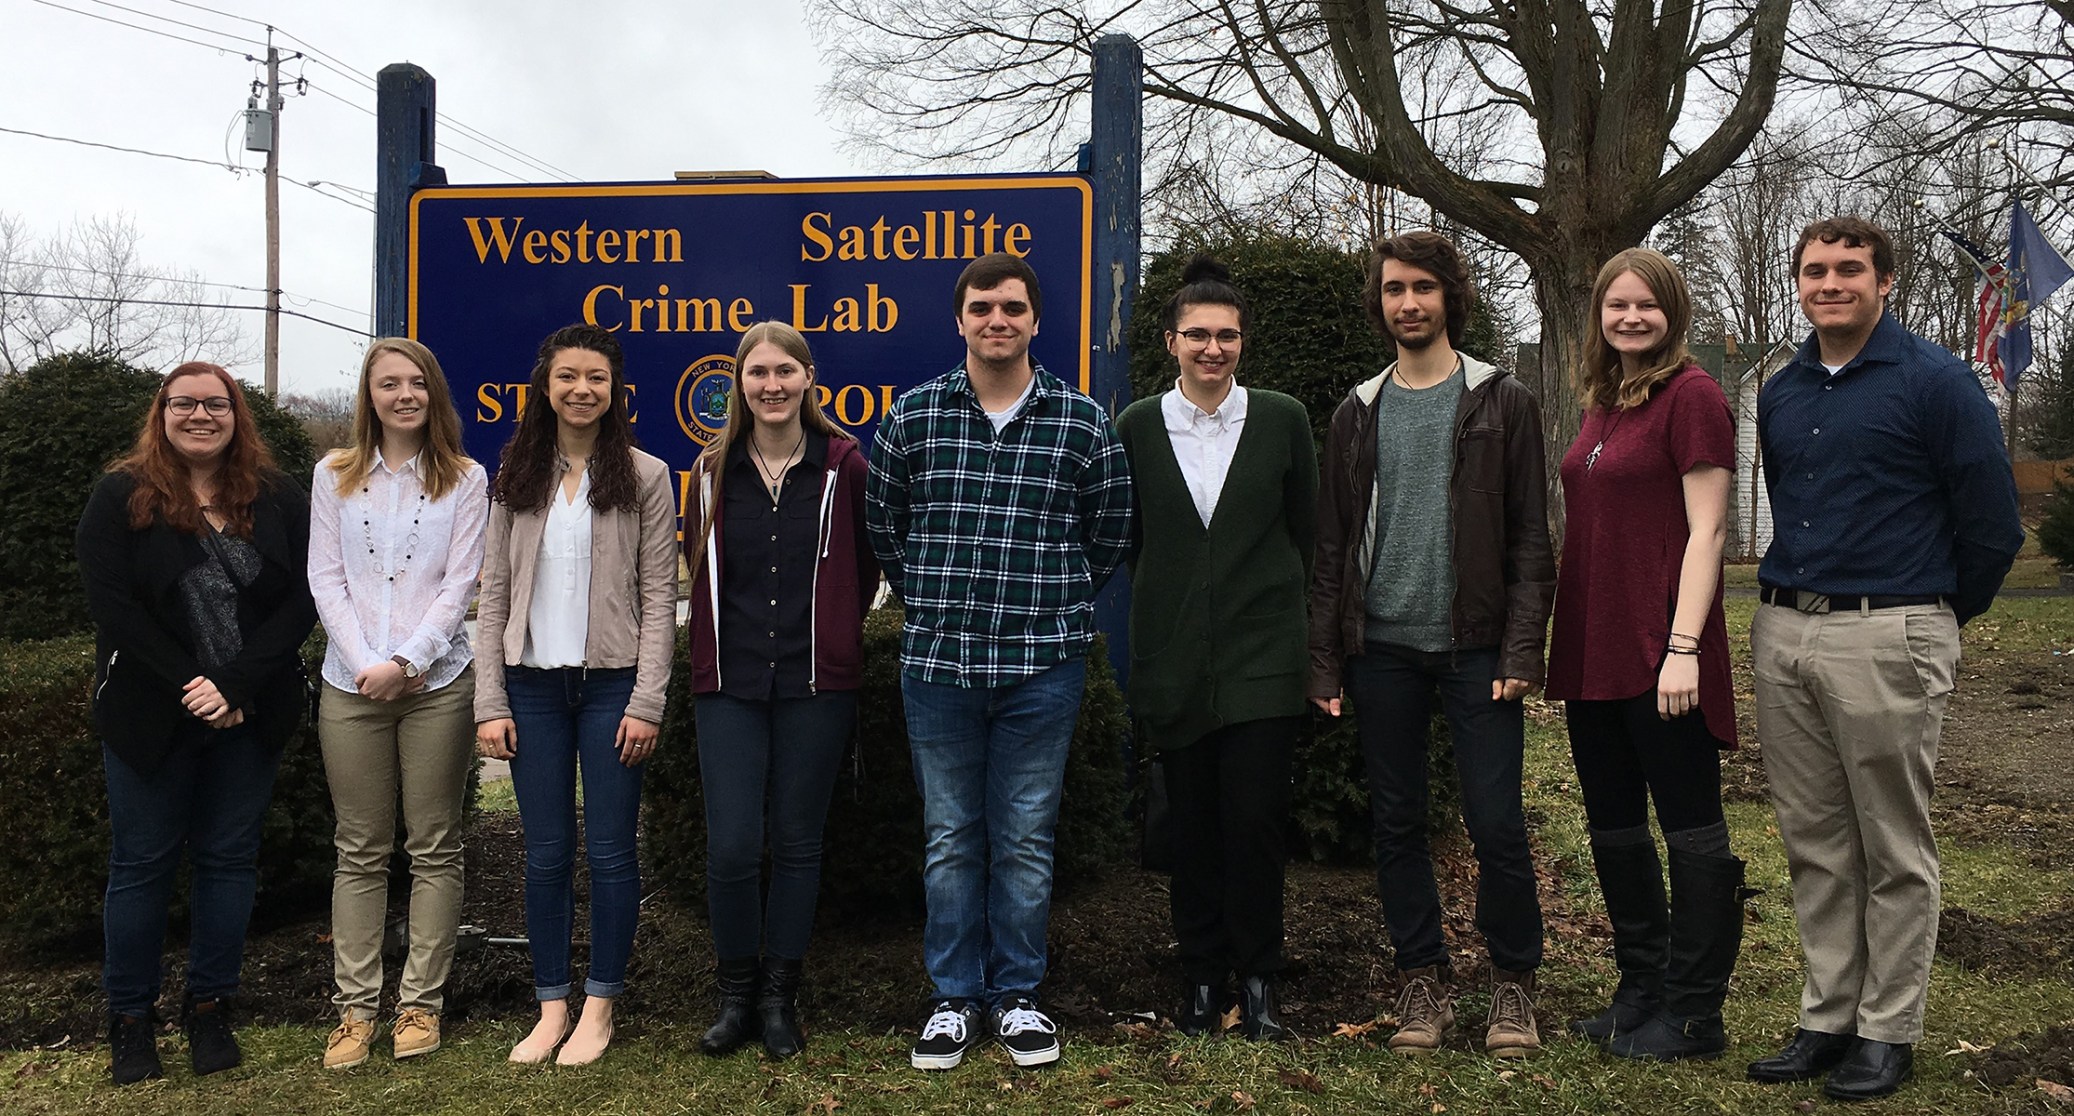 Students in front of the Western Satellite Crime Lab